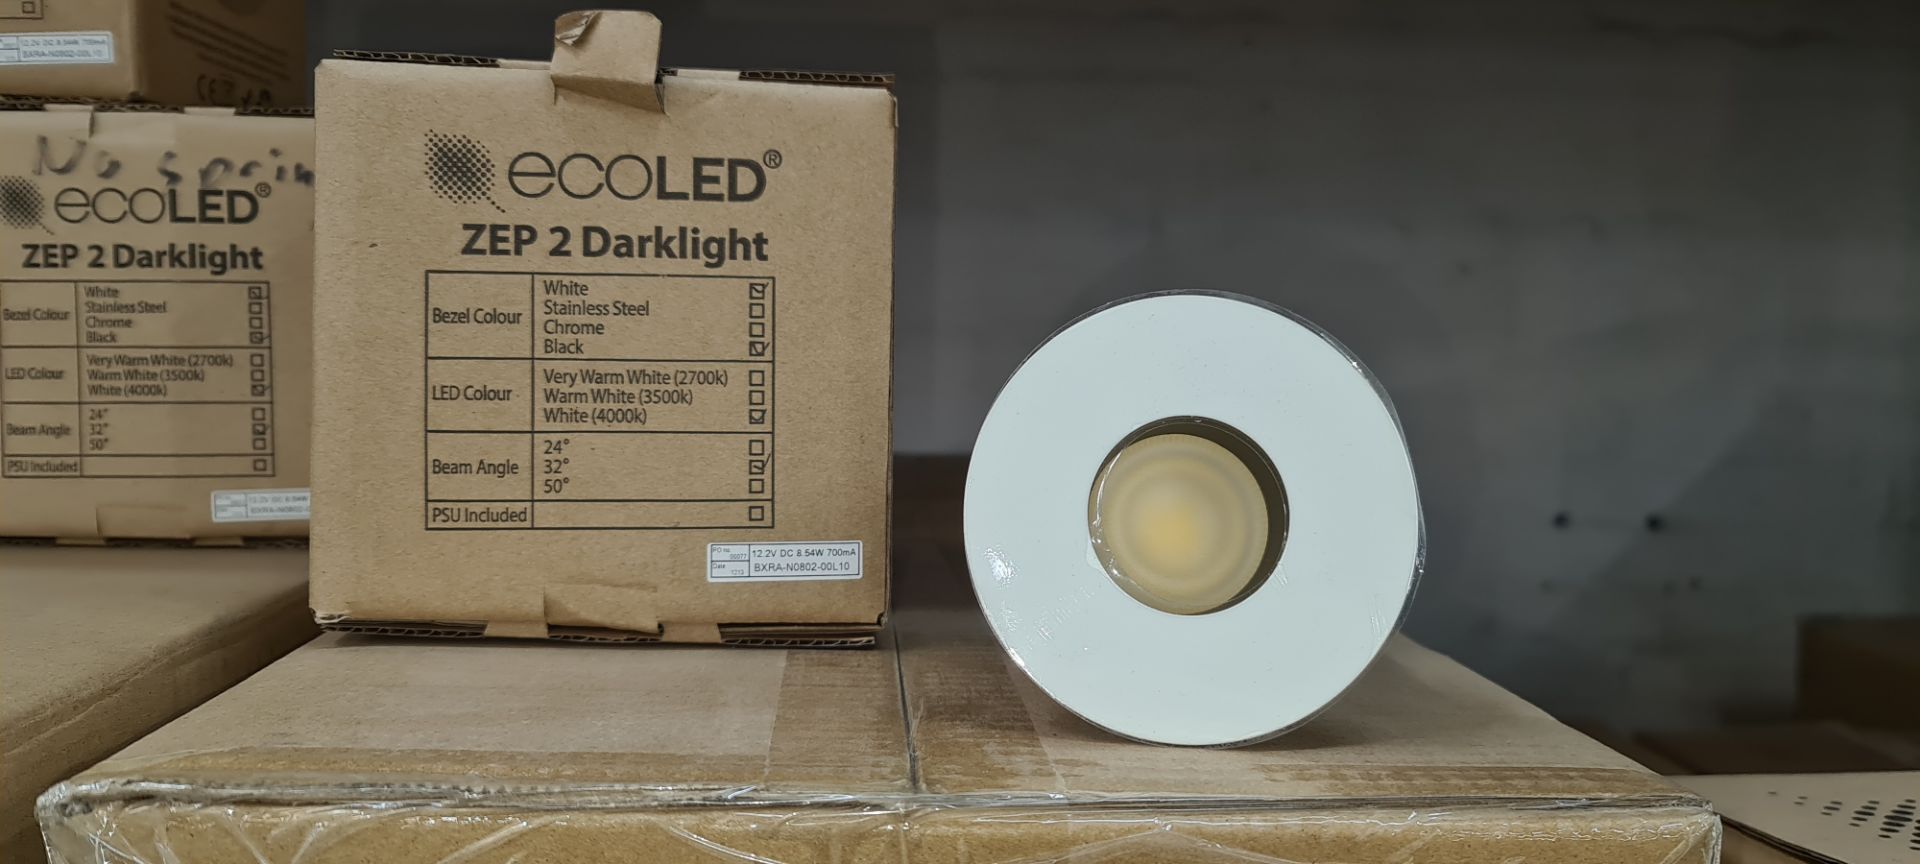 21 off EcoLED ZEP2 Darklight white downlights model Z2-D-W-10-40-80-45-D4 - 2 boxes - Image 2 of 10